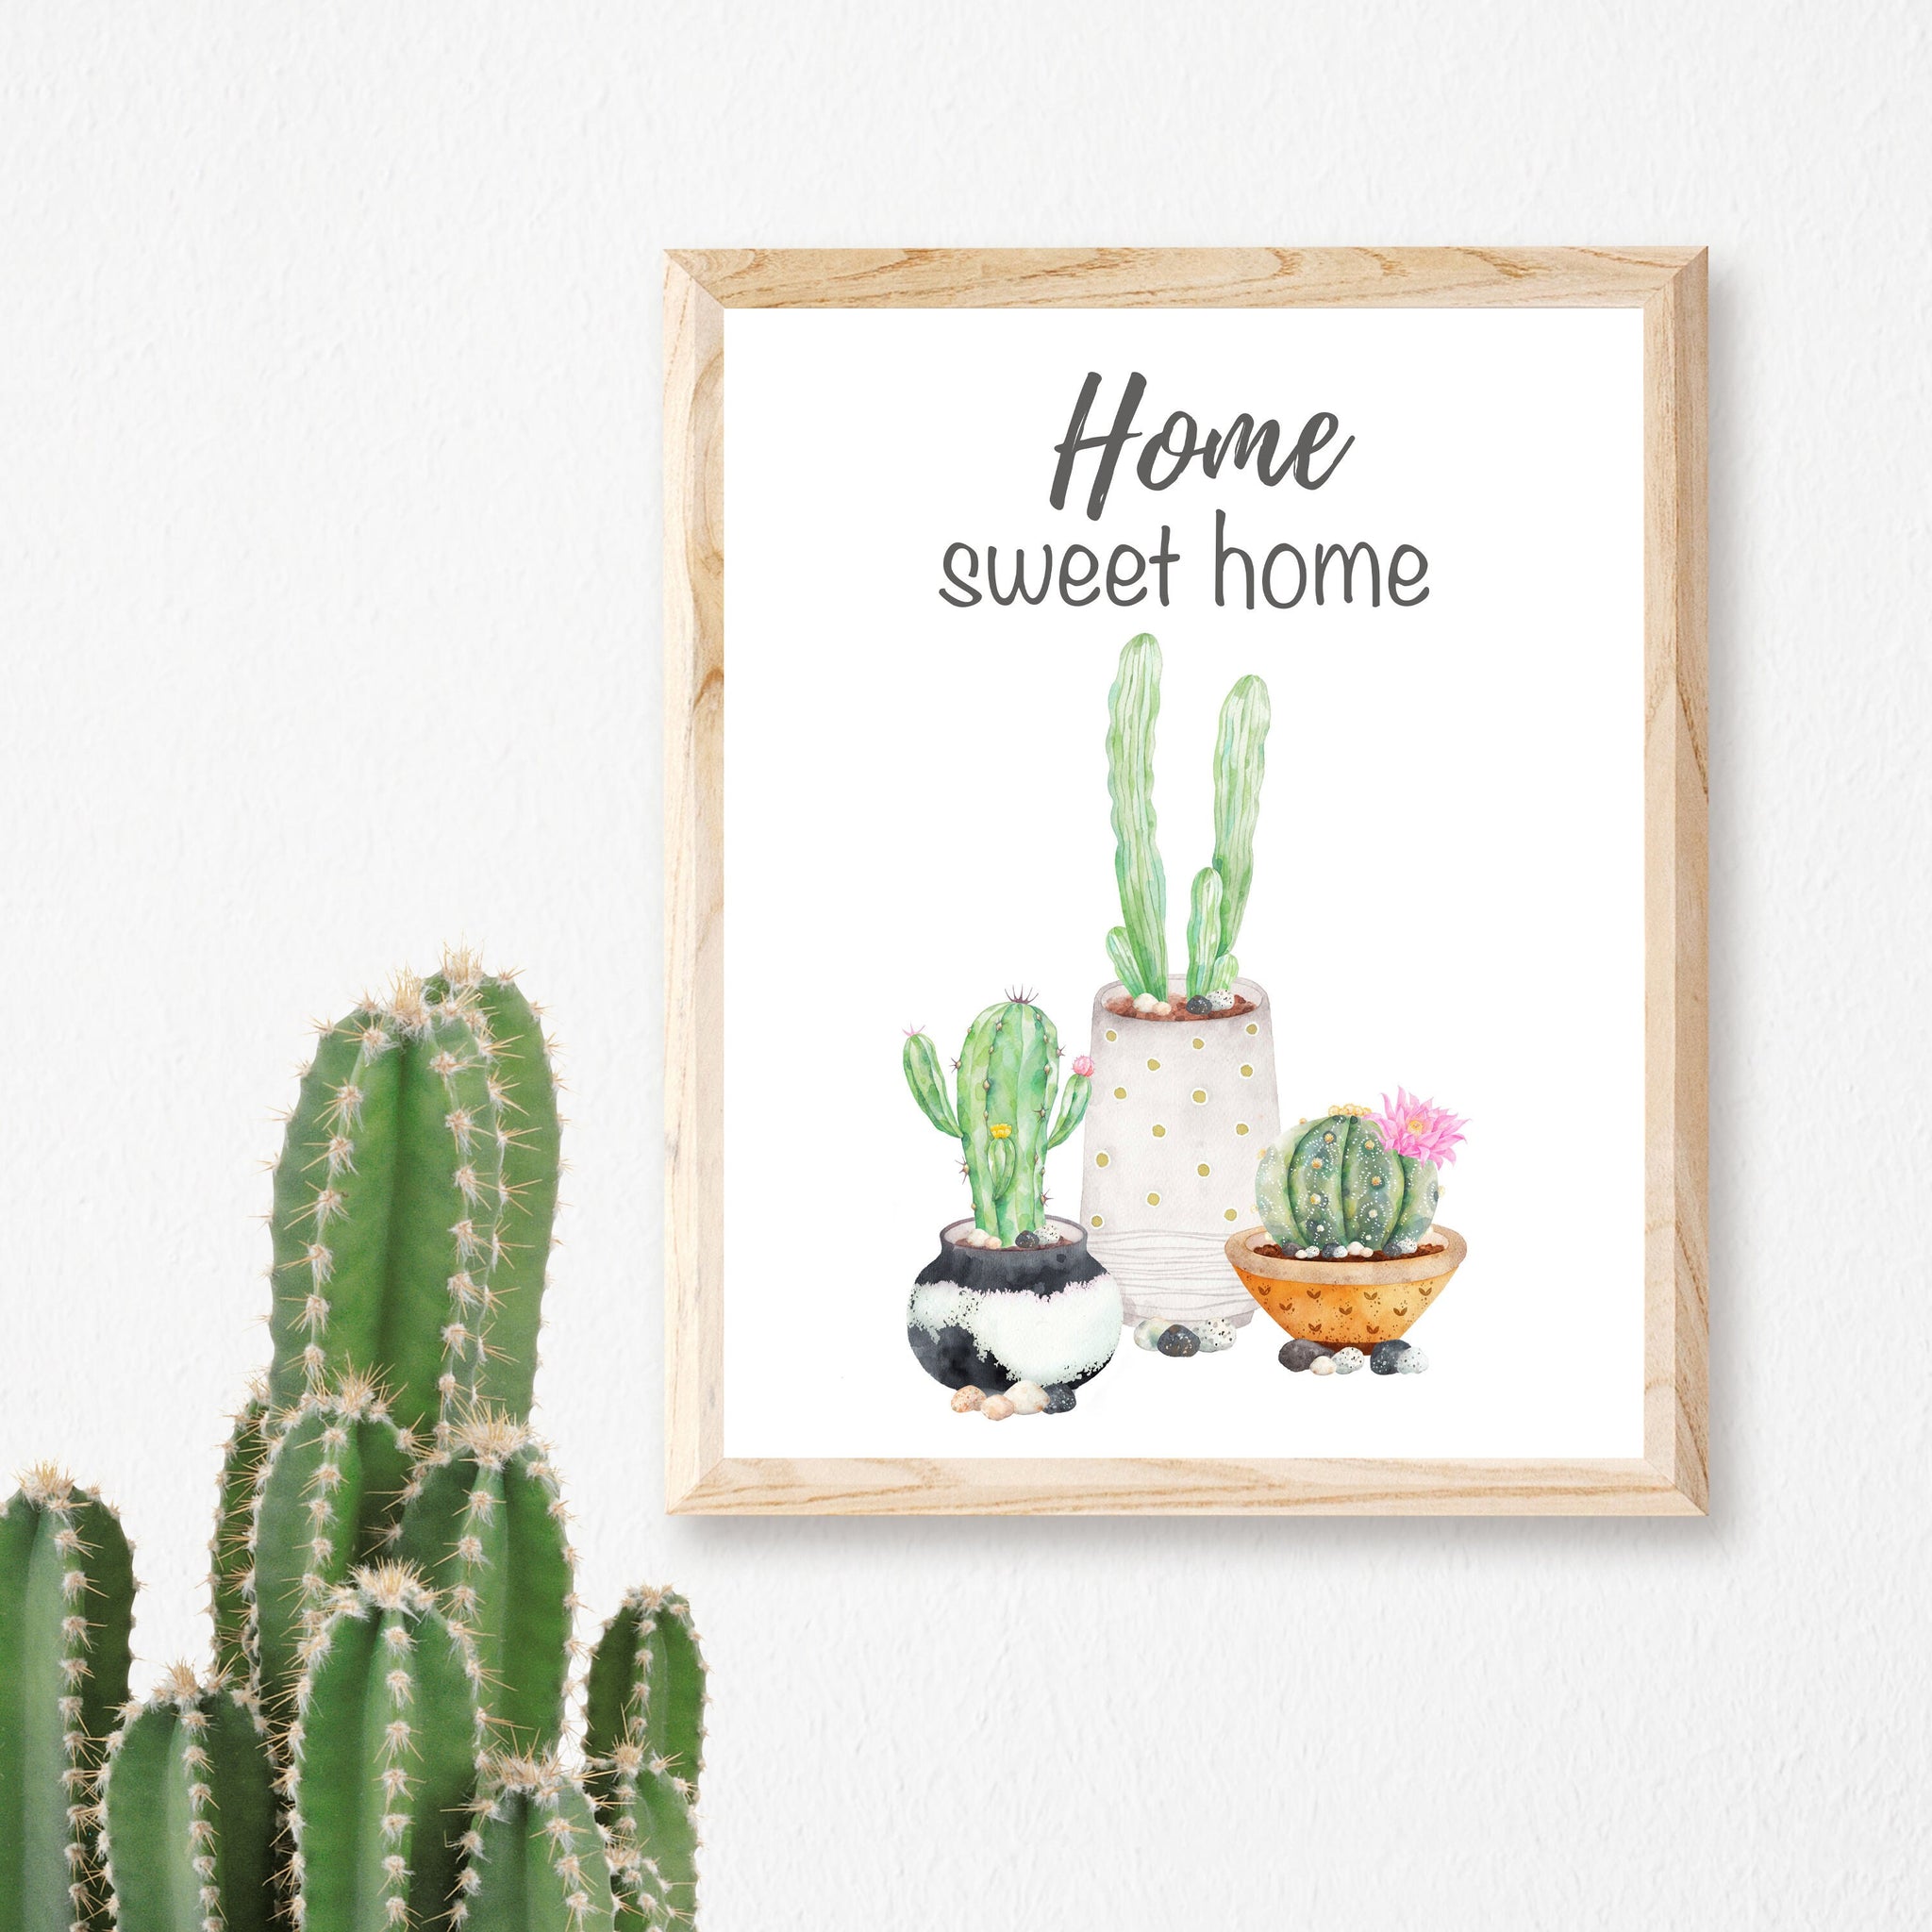 7 Succulents Whispering Whimsical Muses To The Interiors Of The Home